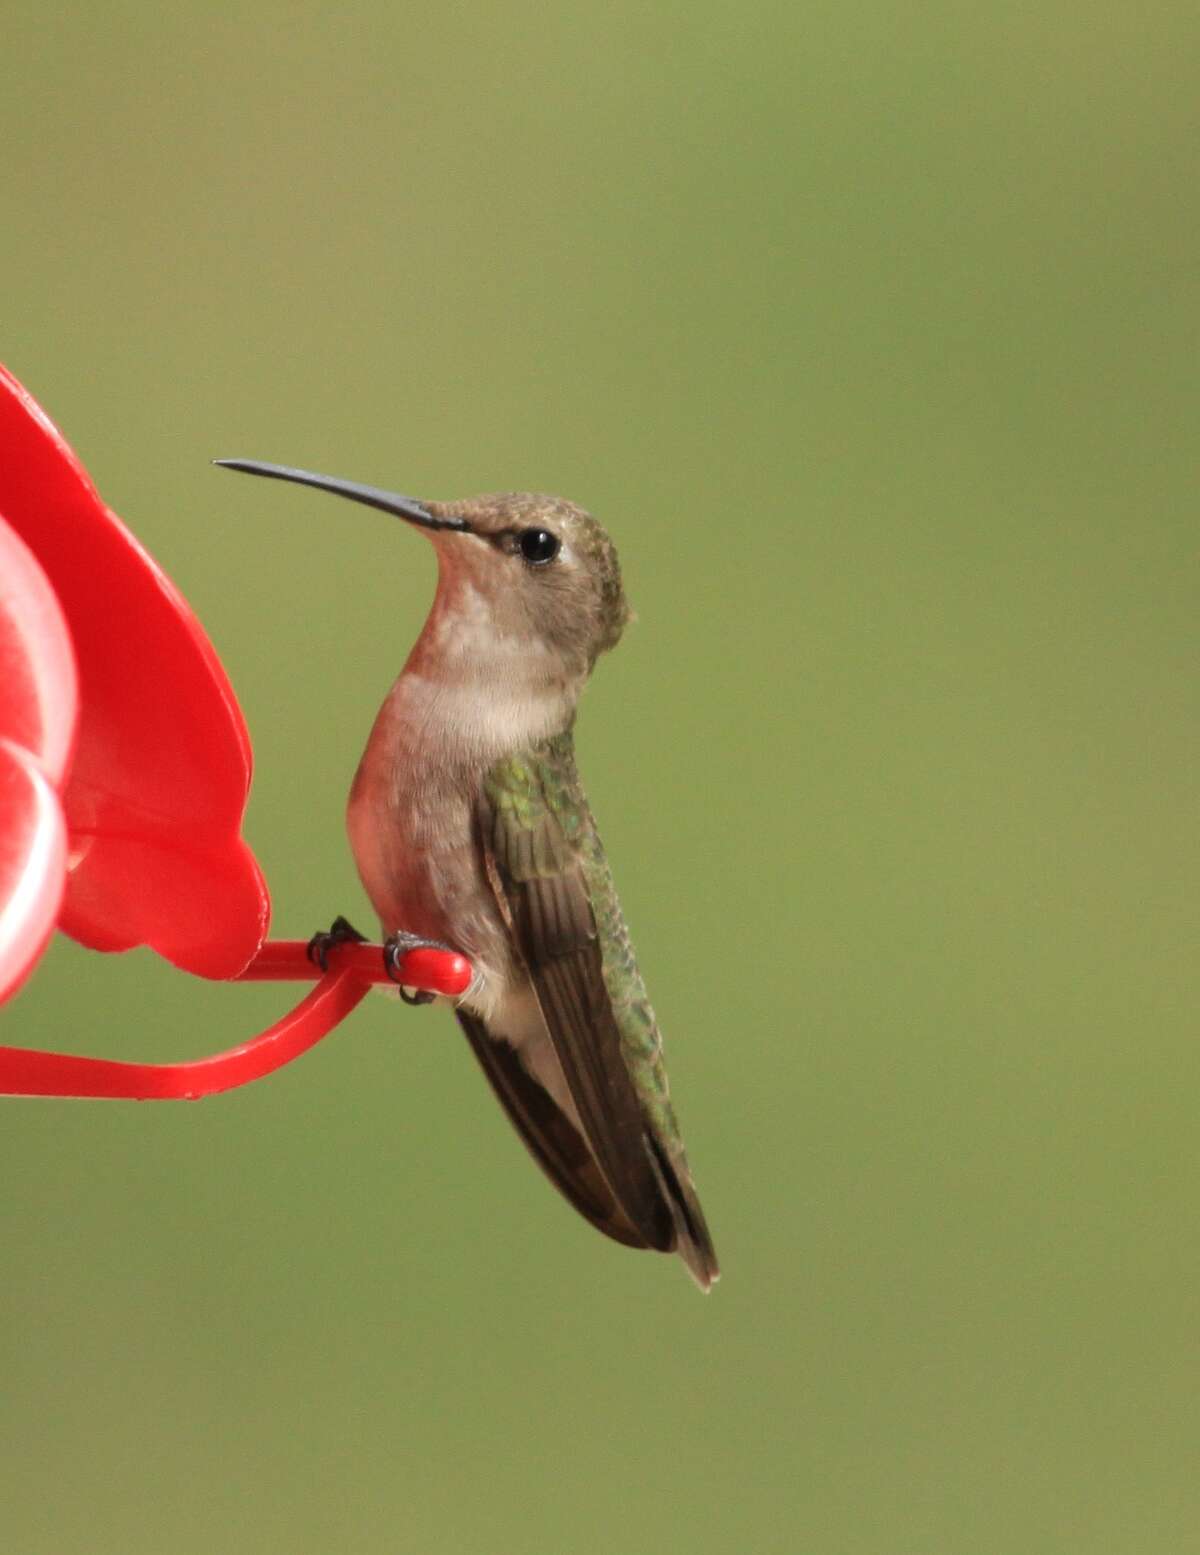 Feeders supplement the hummingbird diet, particularly during dry times when flowers and insects are less available. Perches allow hummingbirds to rest while feeding.